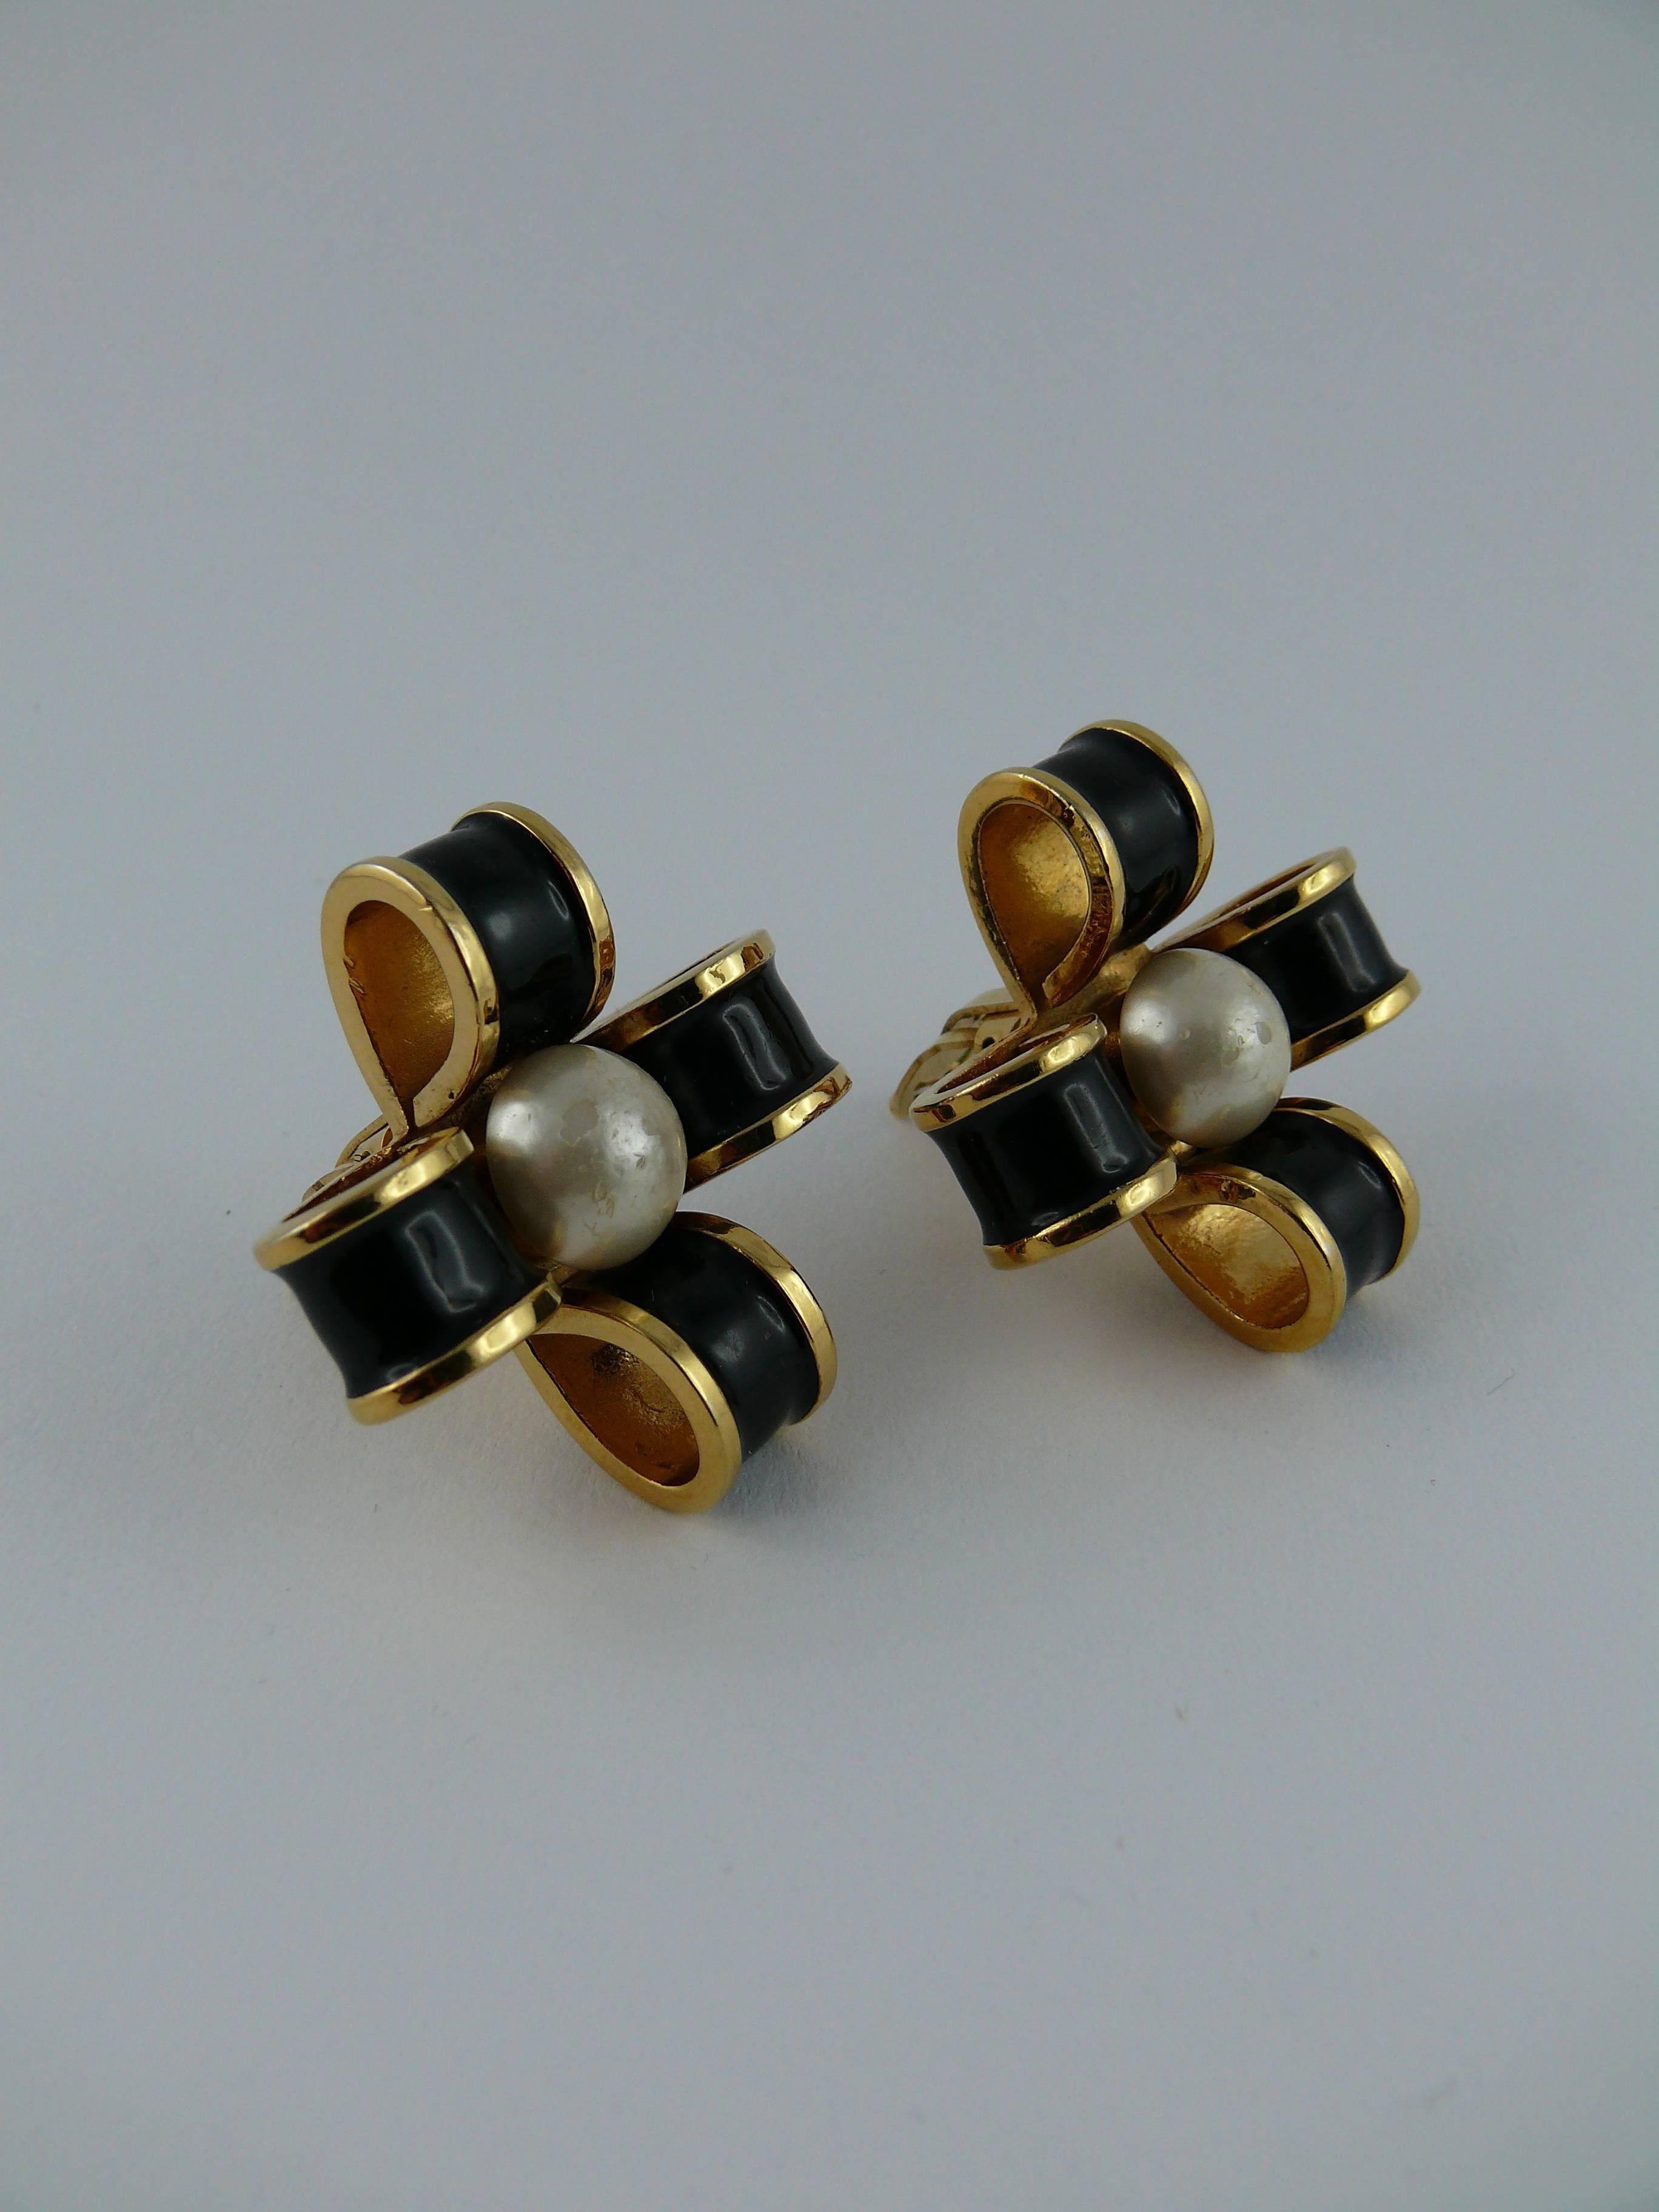 CHANEL vintage balck enamel and pearl bow clip-on earrings.

Embossed CHANEL on the reverse.

JEWELRY CONDITION CHART
- New or never worn : item is in pristine condition with no noticeable imperfections
- Excellent : item has been used and may